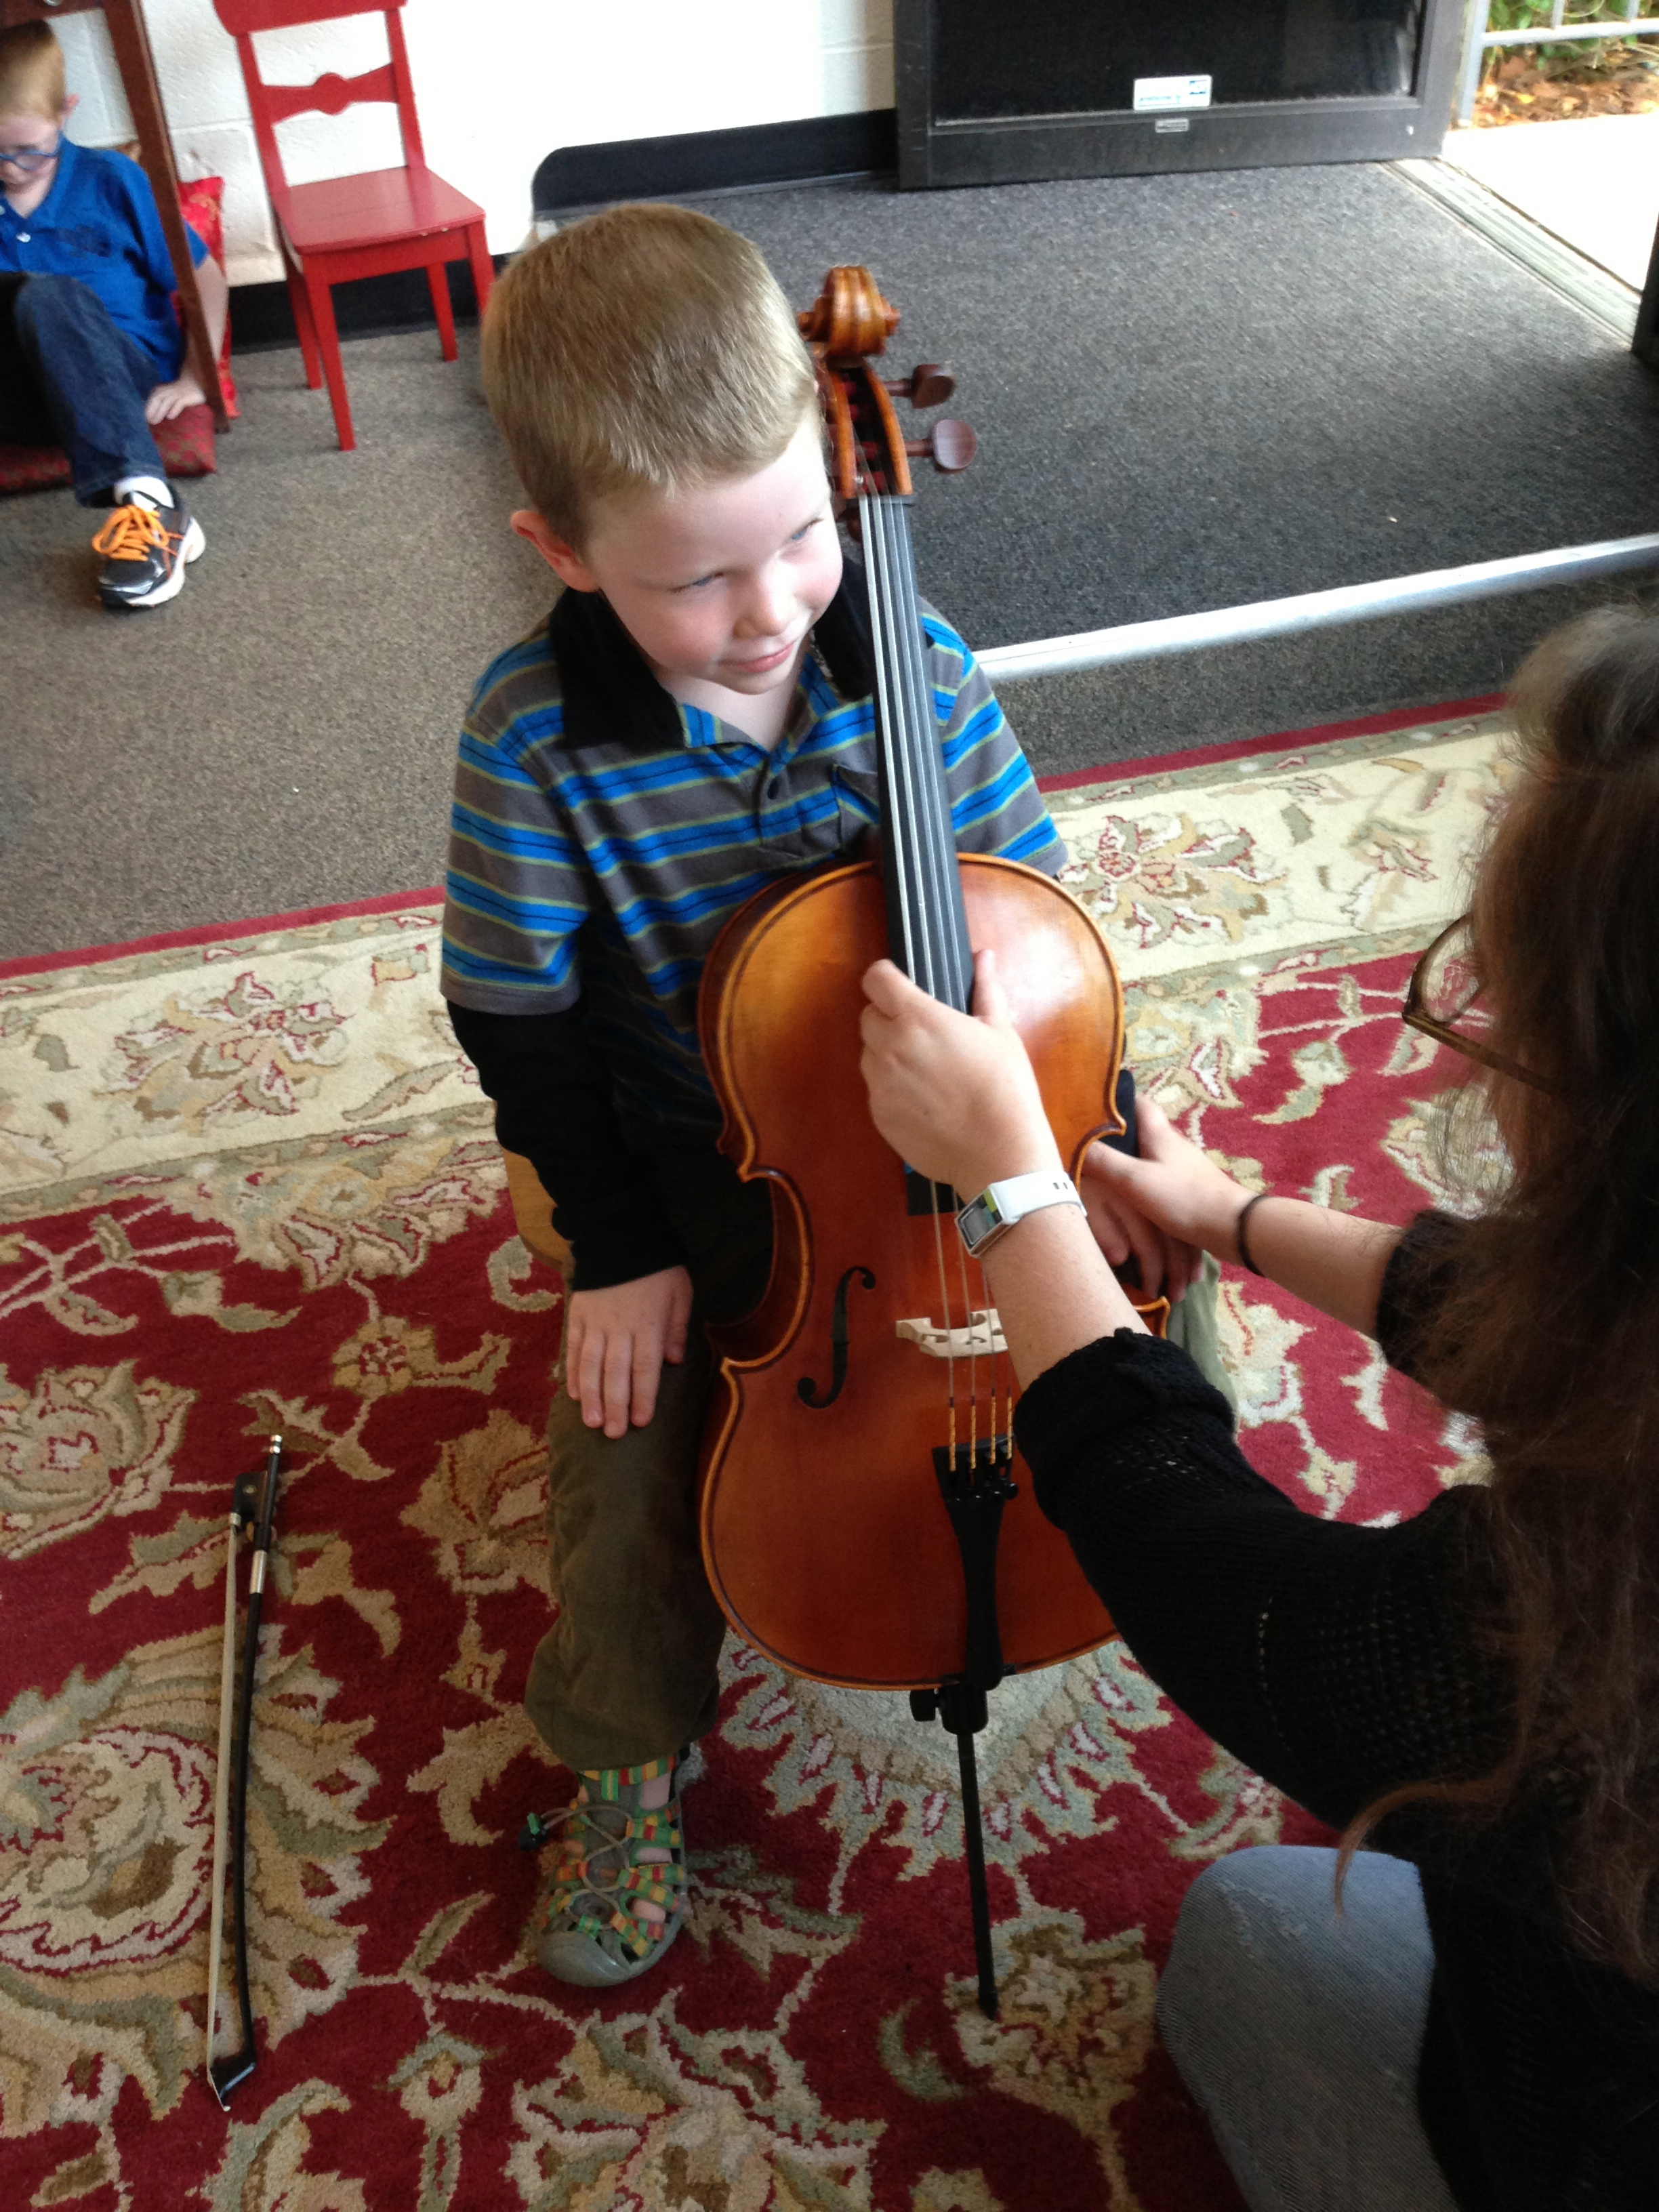 A Star Wars cello video inspired him to start playing.